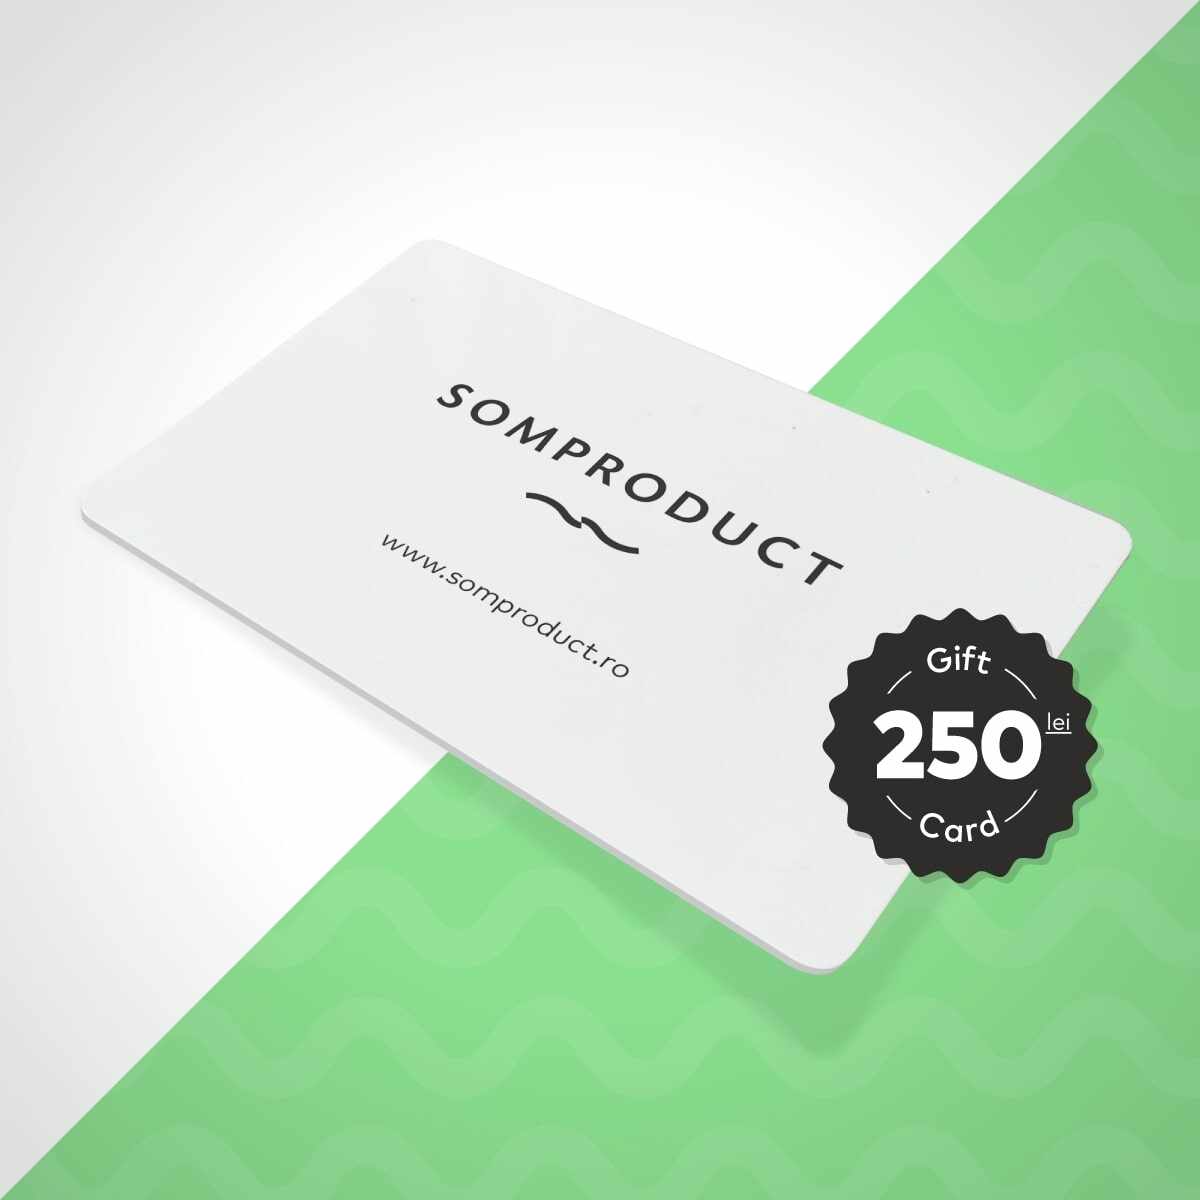 Gift Card SomProduct 250 Lei